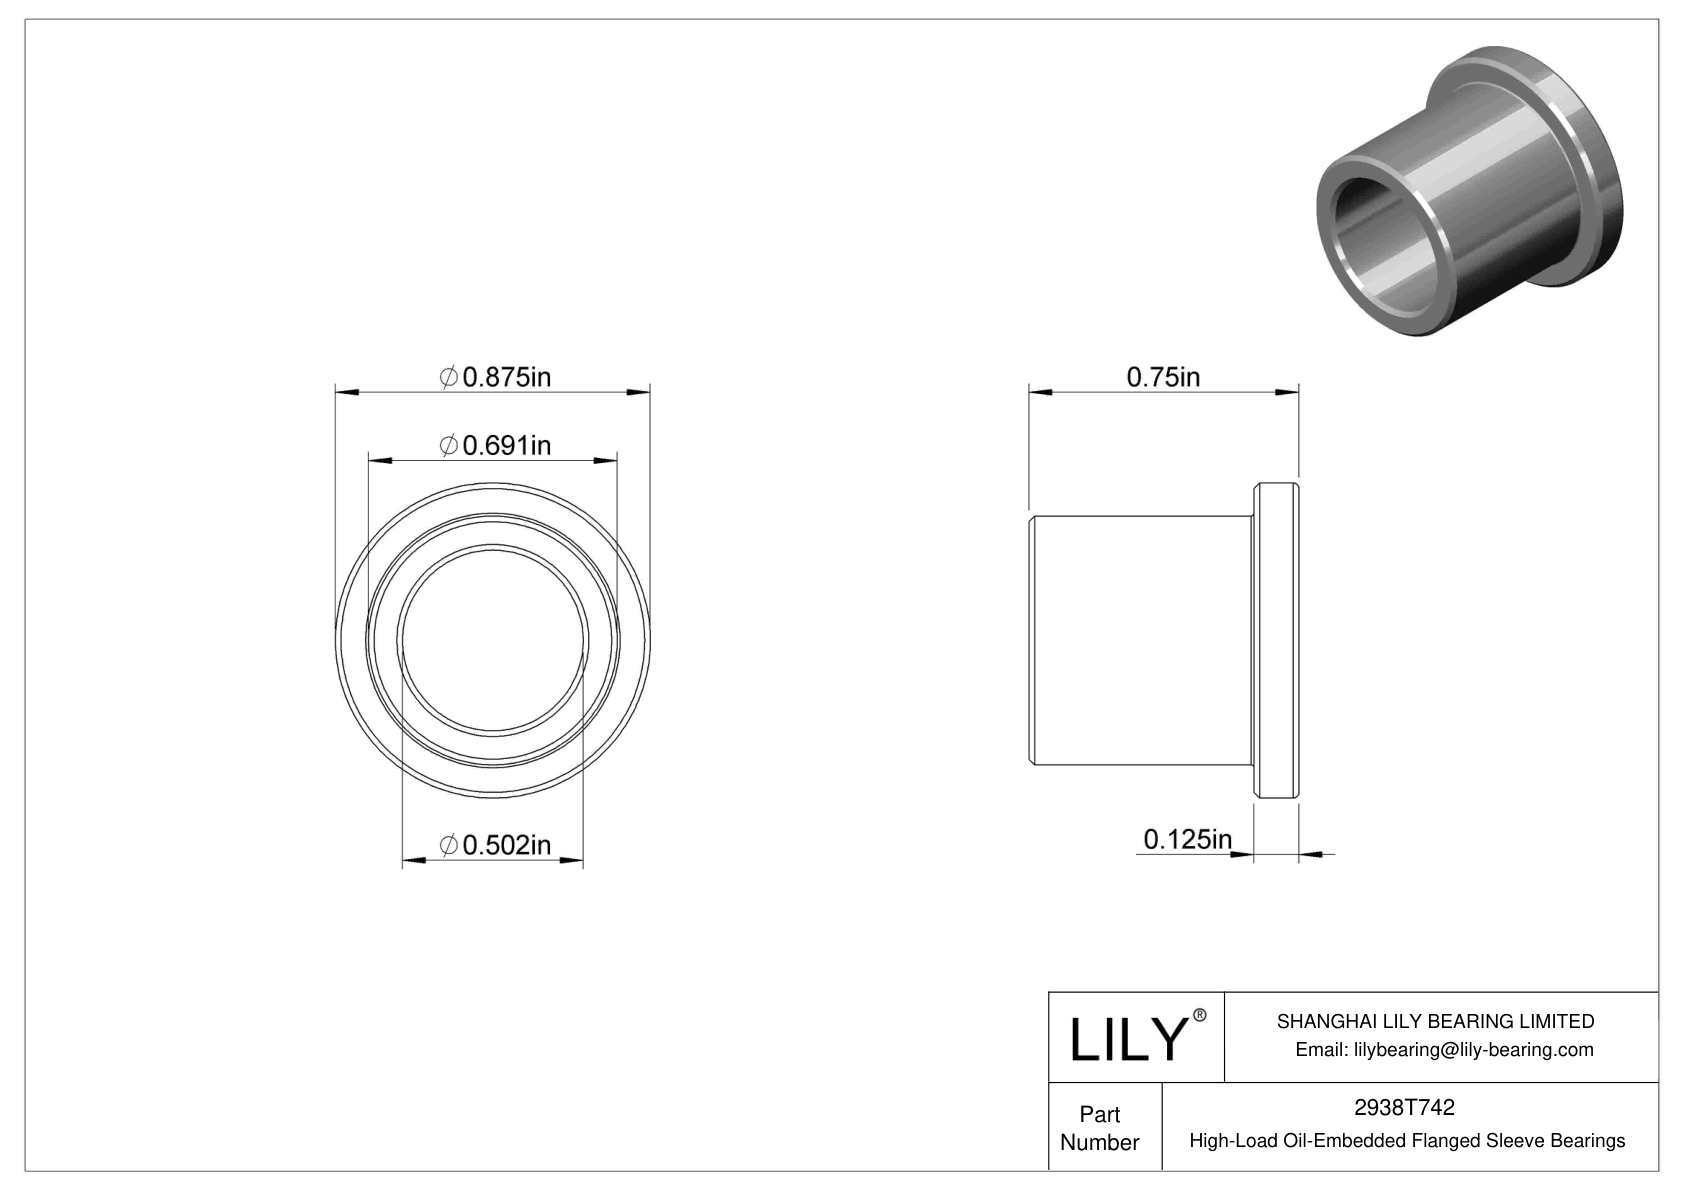 CJDITHEC High-Load Oil-Embedded Flanged Sleeve Bearings cad drawing